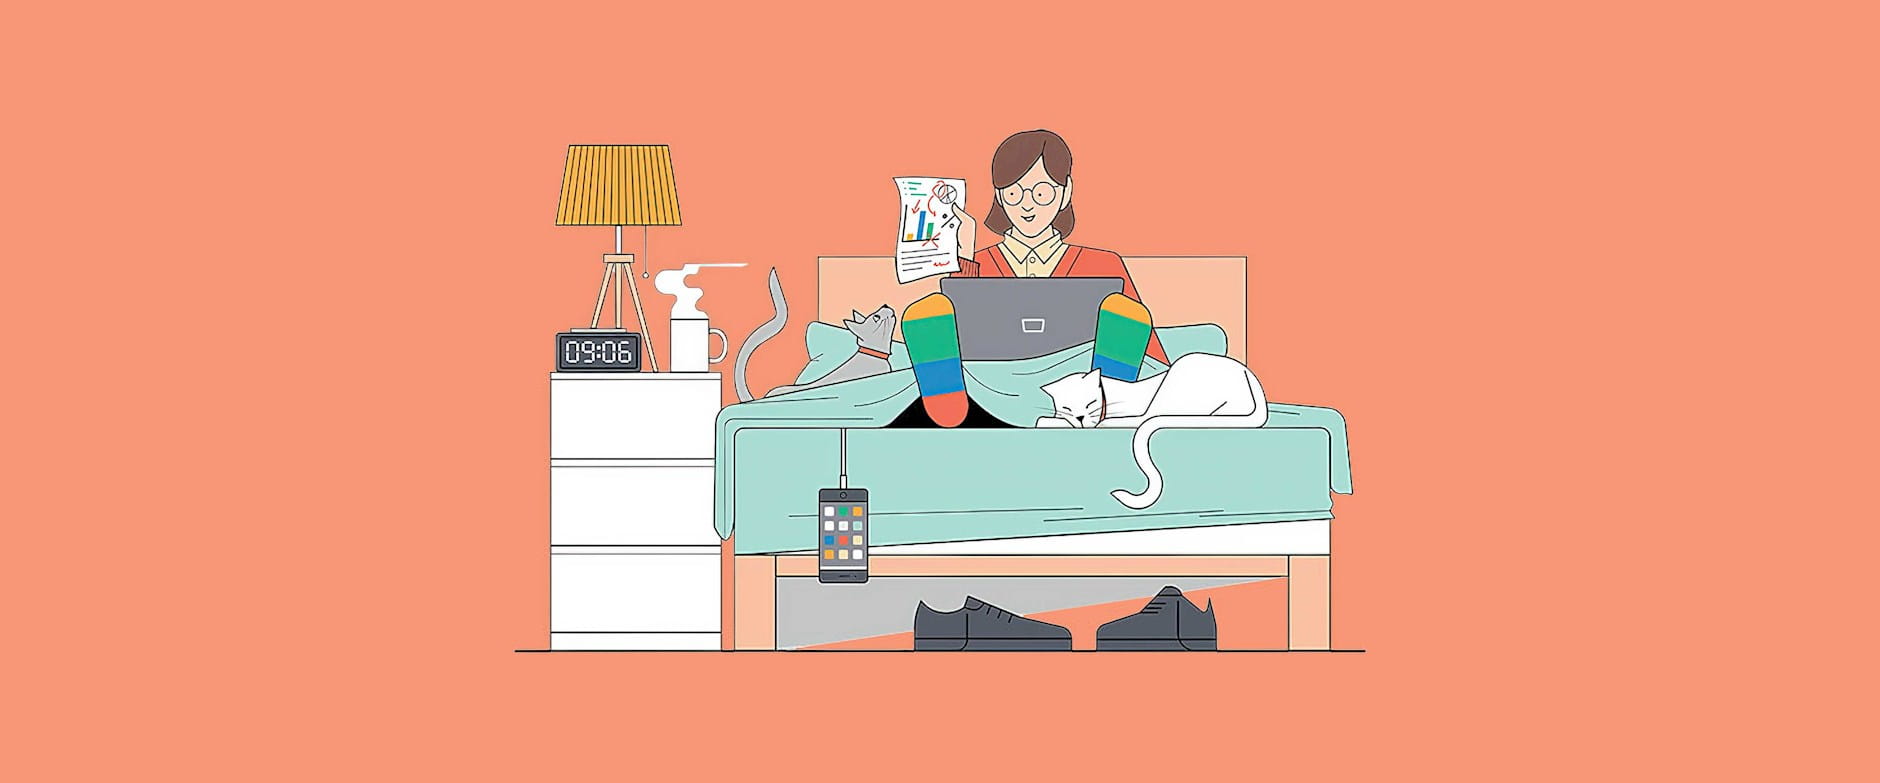 Illustration of a woman working from bed with her cats, laptop and chart papers